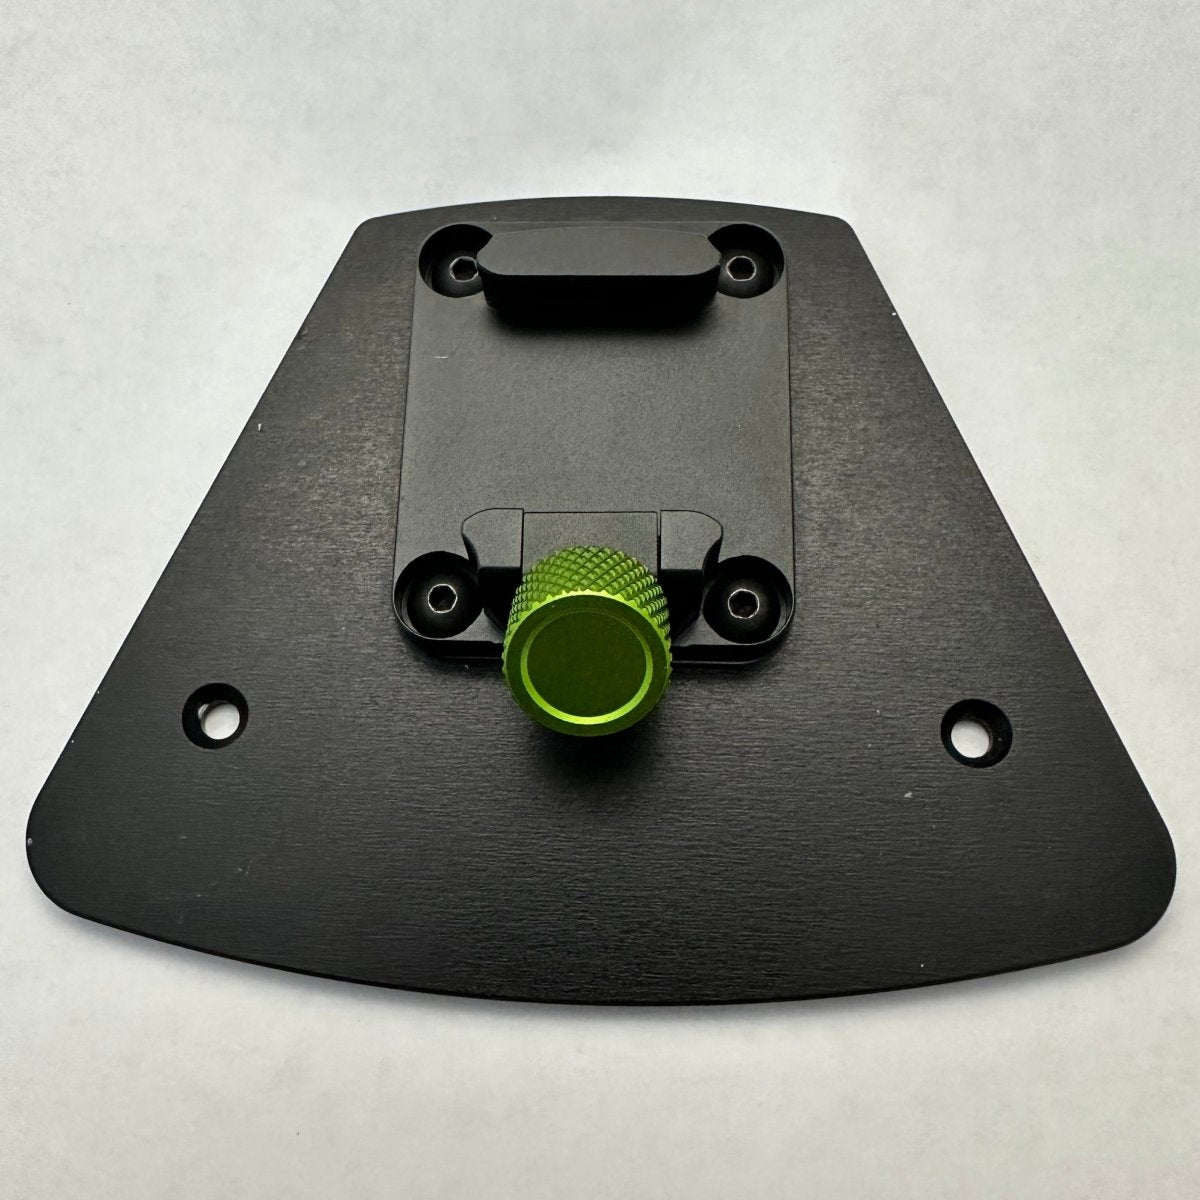 Beech Yoke Faceplate Compact Quick Release - Preorder - Ships in 2-3 Weeks - MYGOFLIGHT